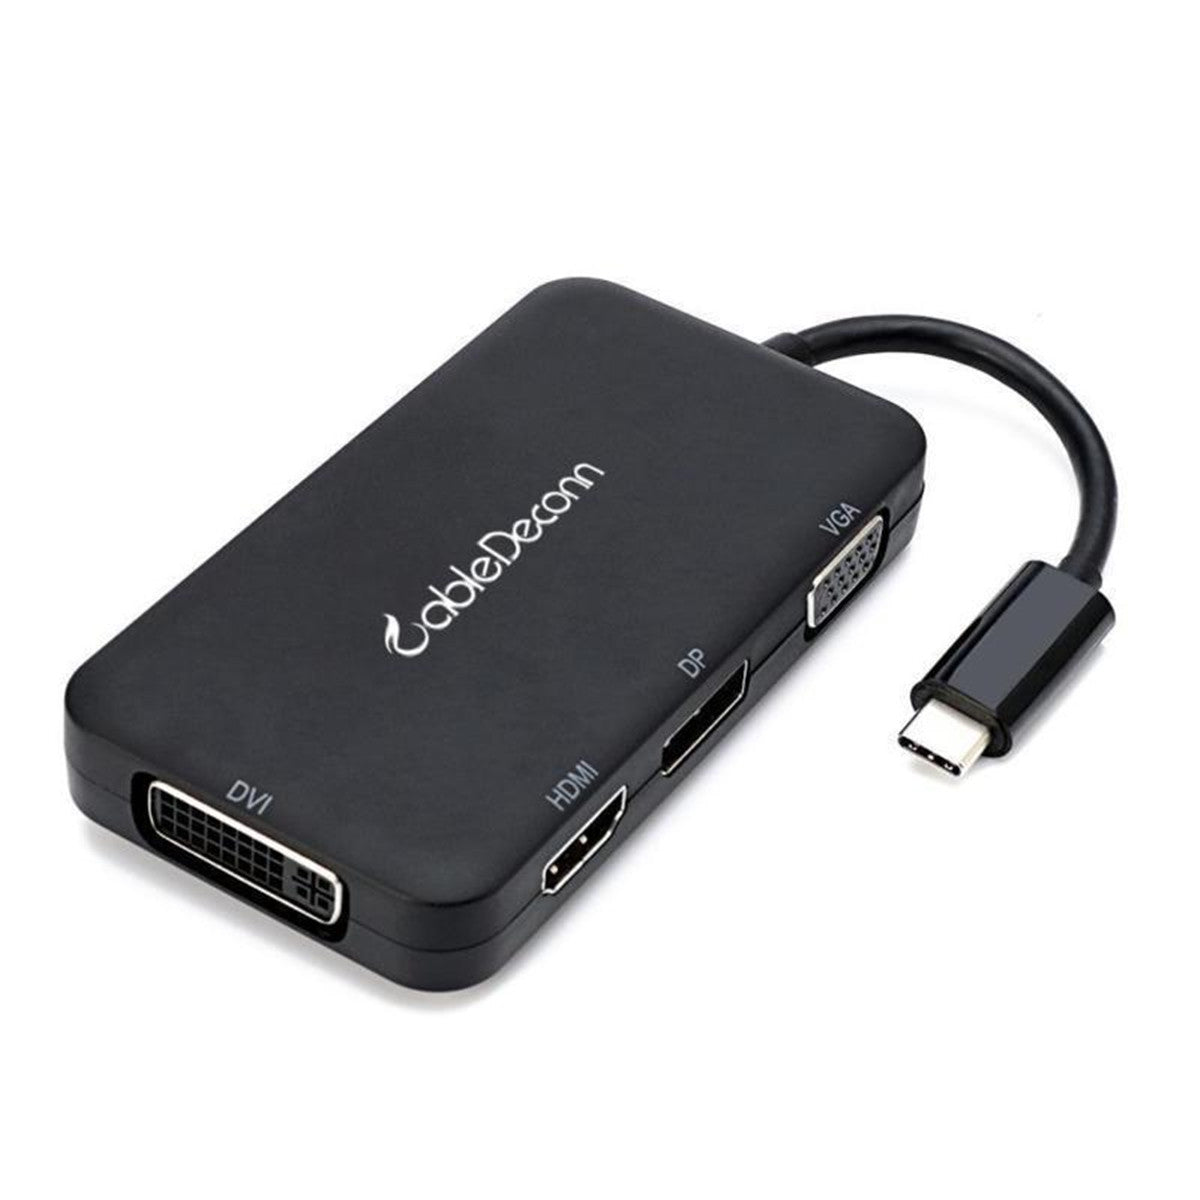 USB 3.1 Type-C To HD DP DVI VGA 4K Cable Adapter 4 in 1 Converter